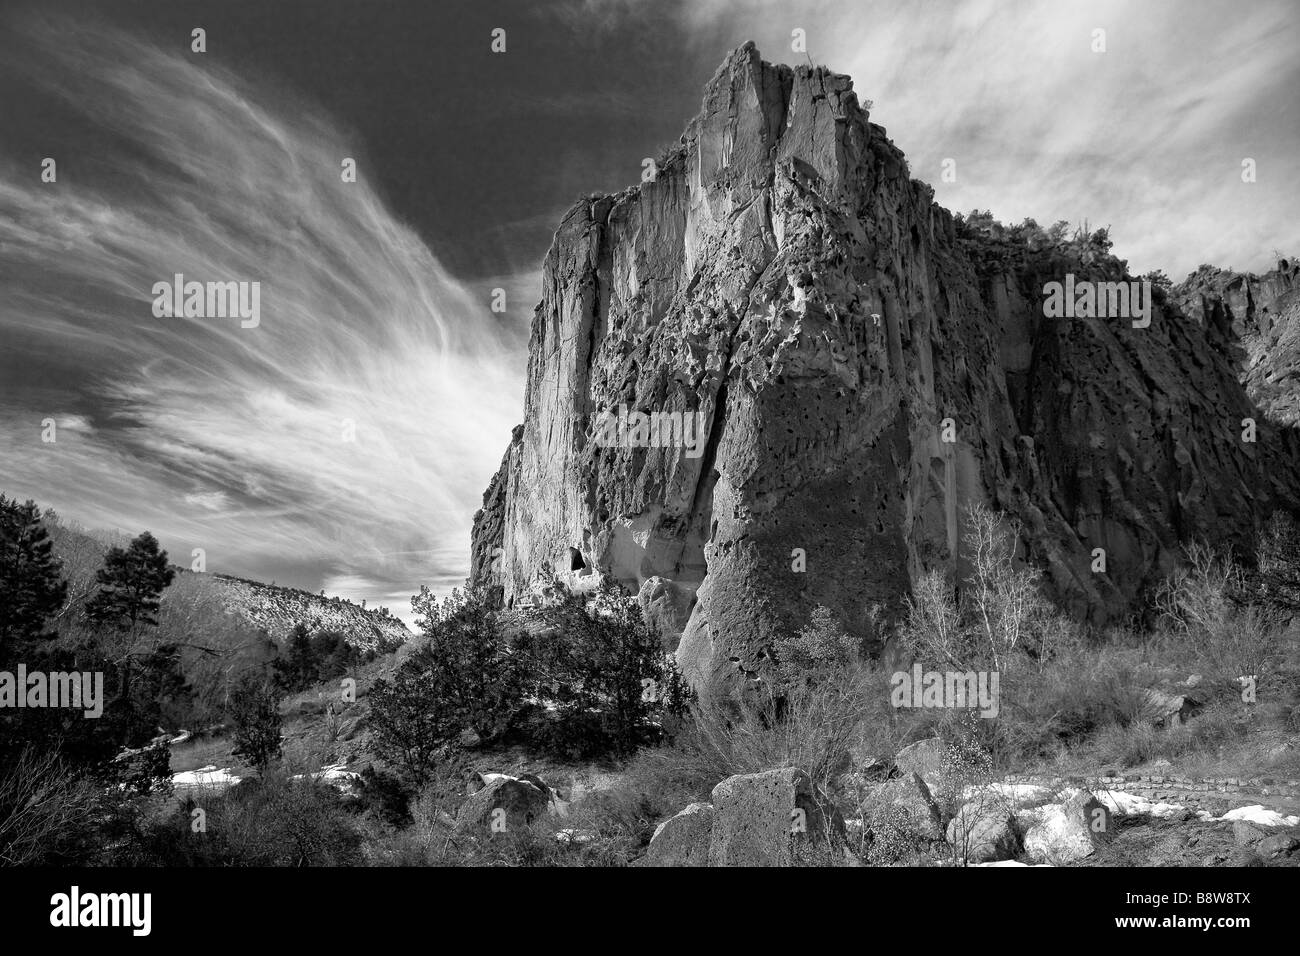 The Bandelier National Monument, a wilderness area in northern New Mexico, USA Stock Photo